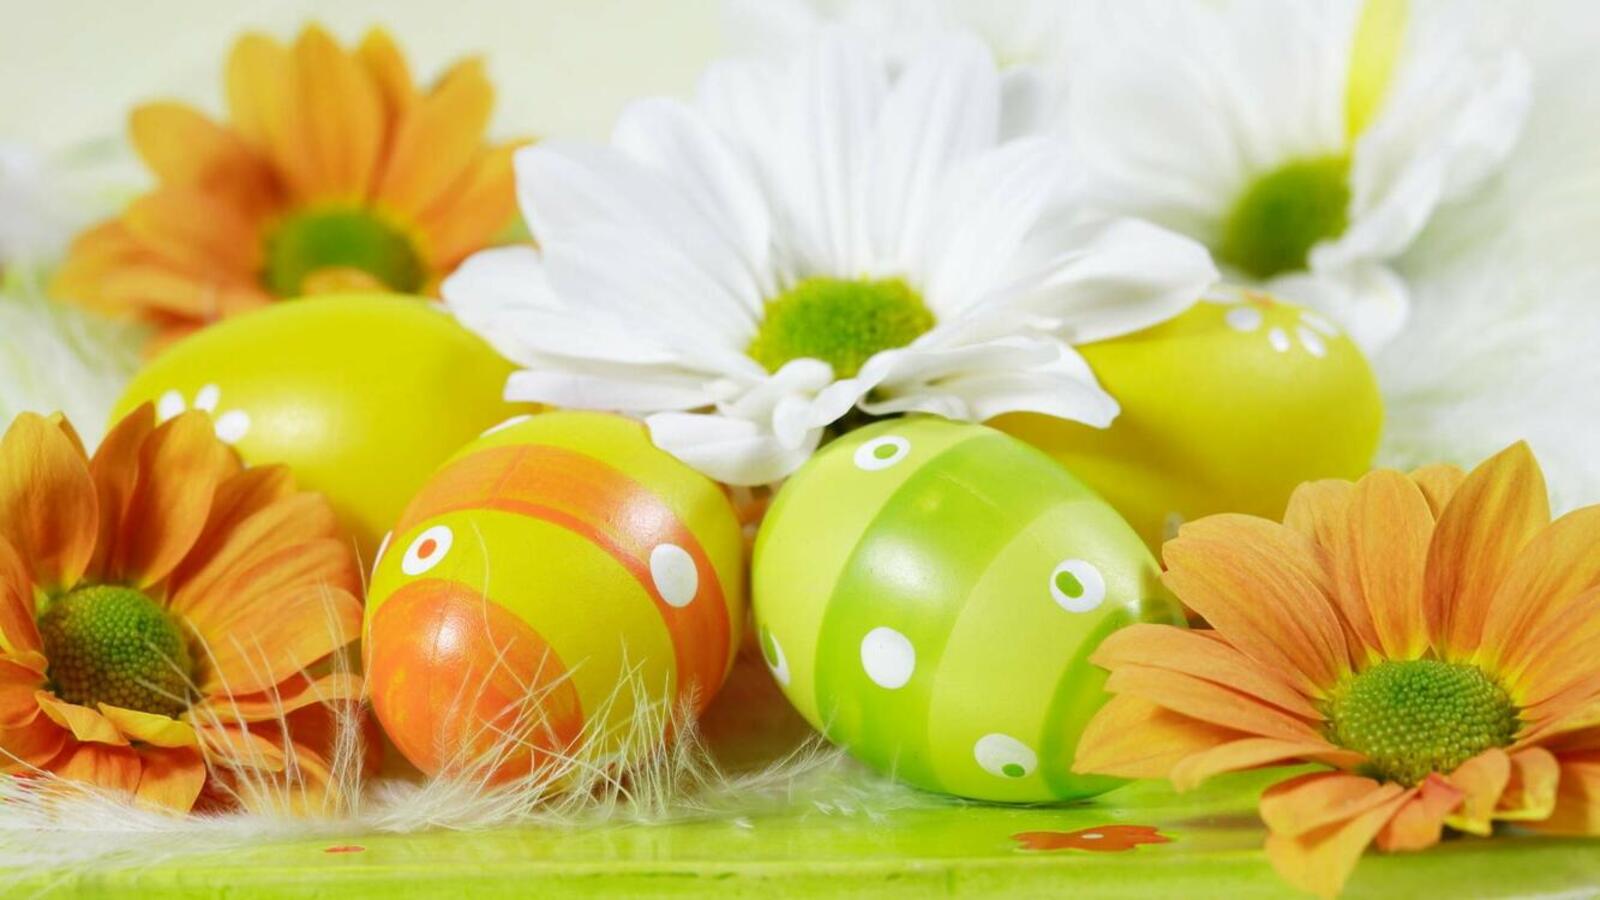 Wallpapers colored eggs green eggs flowers on the desktop